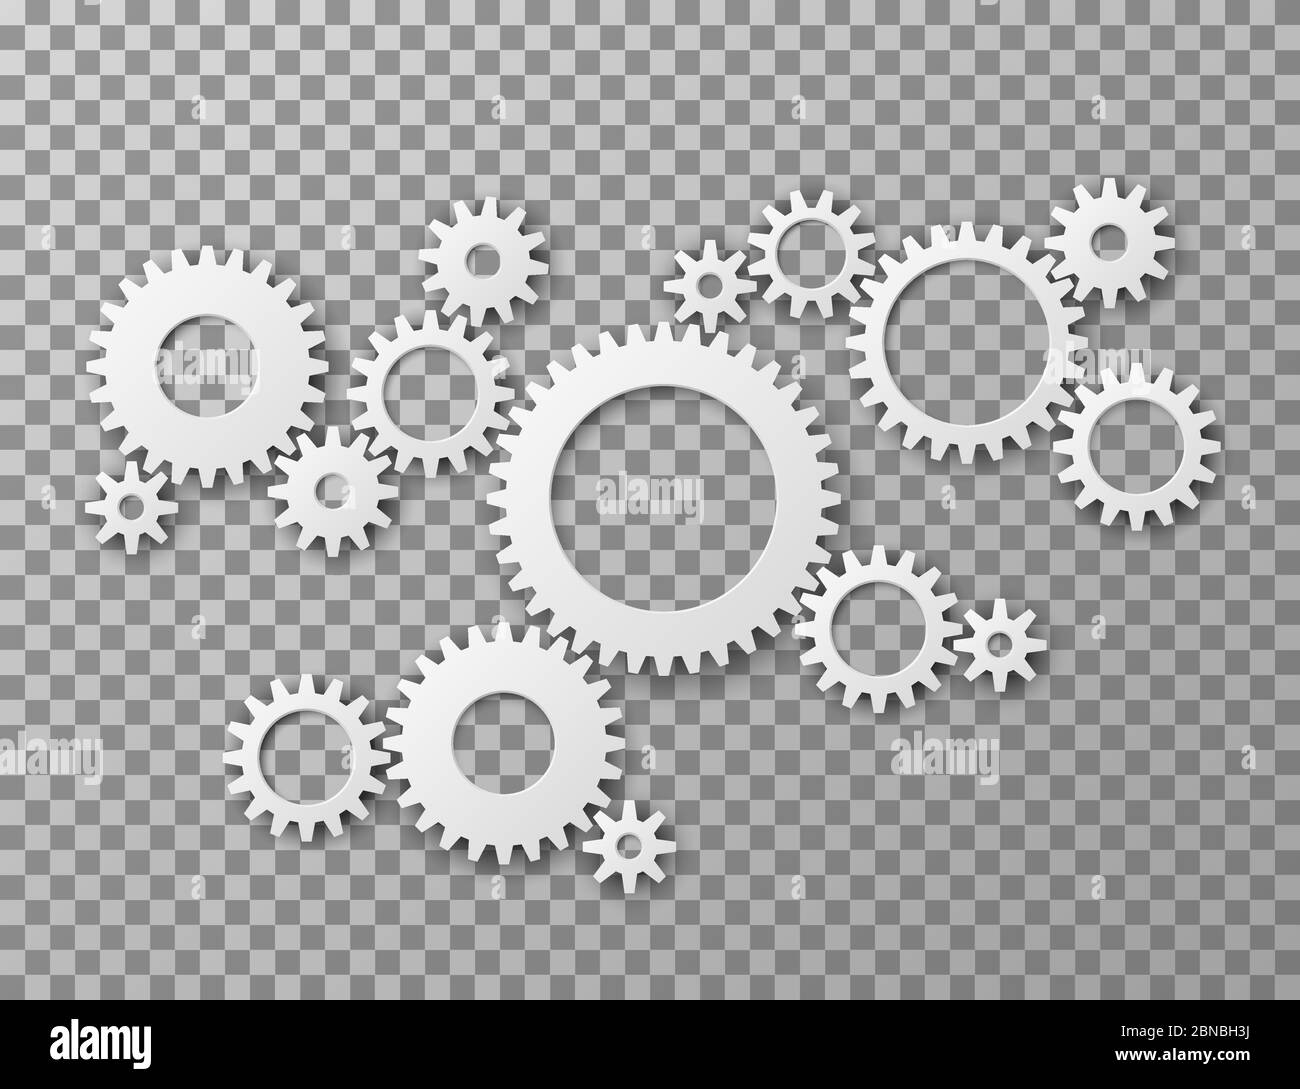 Gears background. Cogwheels gearing isolated on transparent background. Machine components industrial and engineering vector concept. Illustration of gear cogwheel, mechanical mechanism process Stock Vector